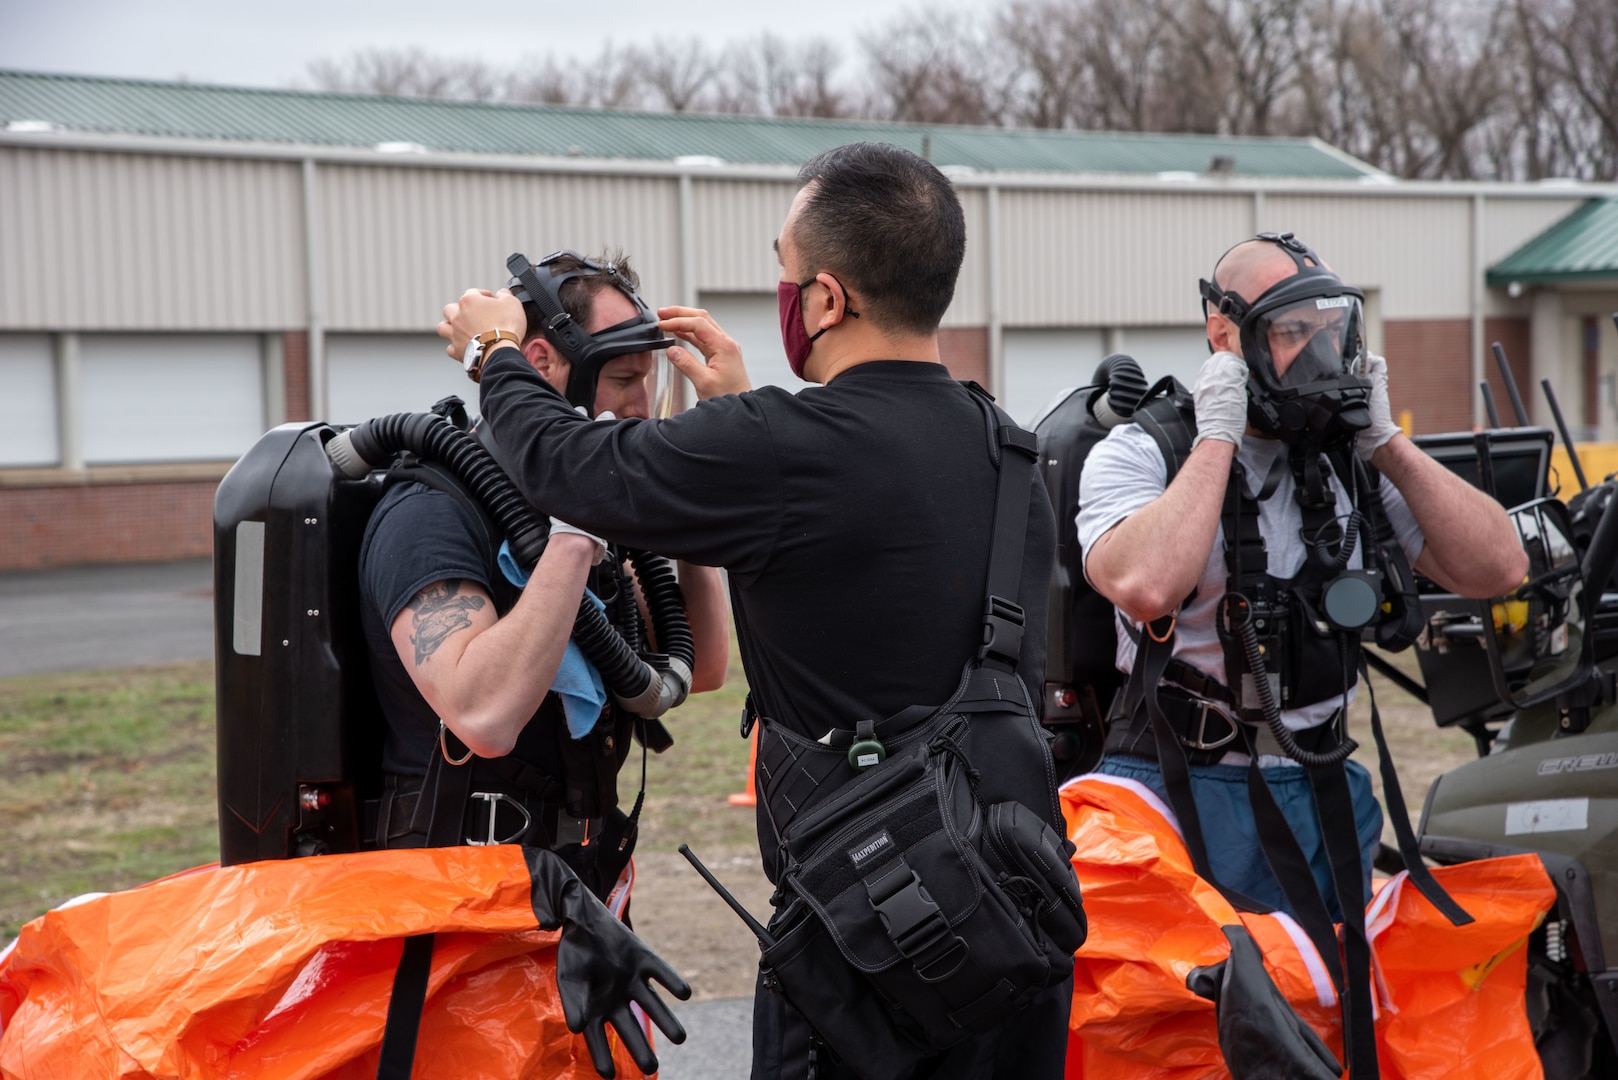 Sgt. Dan Pyo of the 14th Civil Support Team assists teammate Sgt. Justin Madore during a training exercise at the Eastern States Exposition Center in West Springfield, Mass., on March 25, 2021. The Training Proficiency Evaluation is led by U.S. Army North for a CST to validate their training and equipment every 18 months.